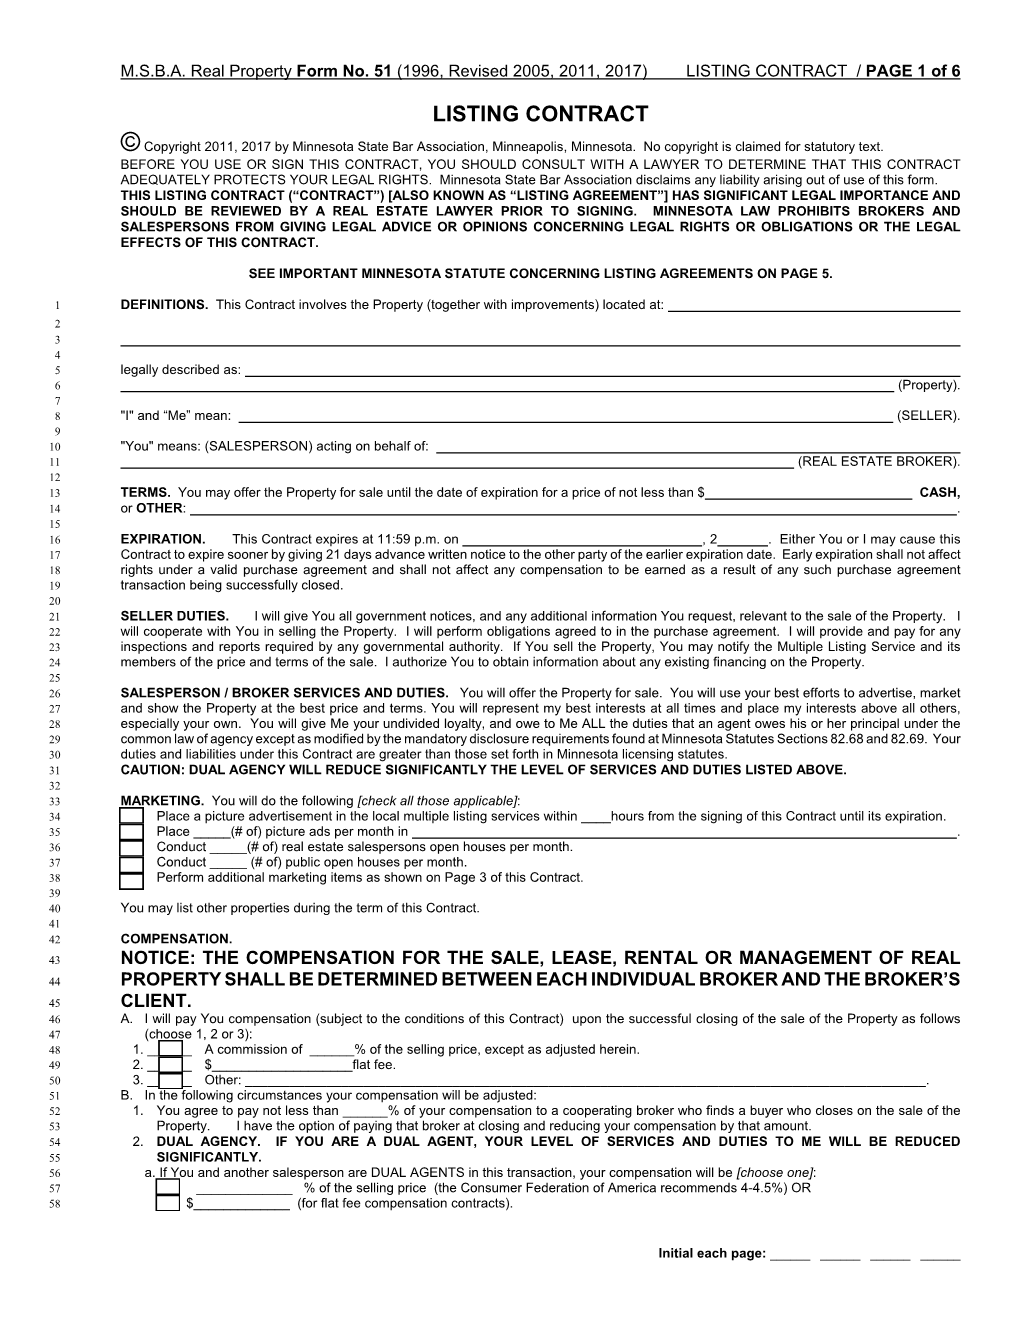 LISTING CONTRACT / PAGE 1 of 6